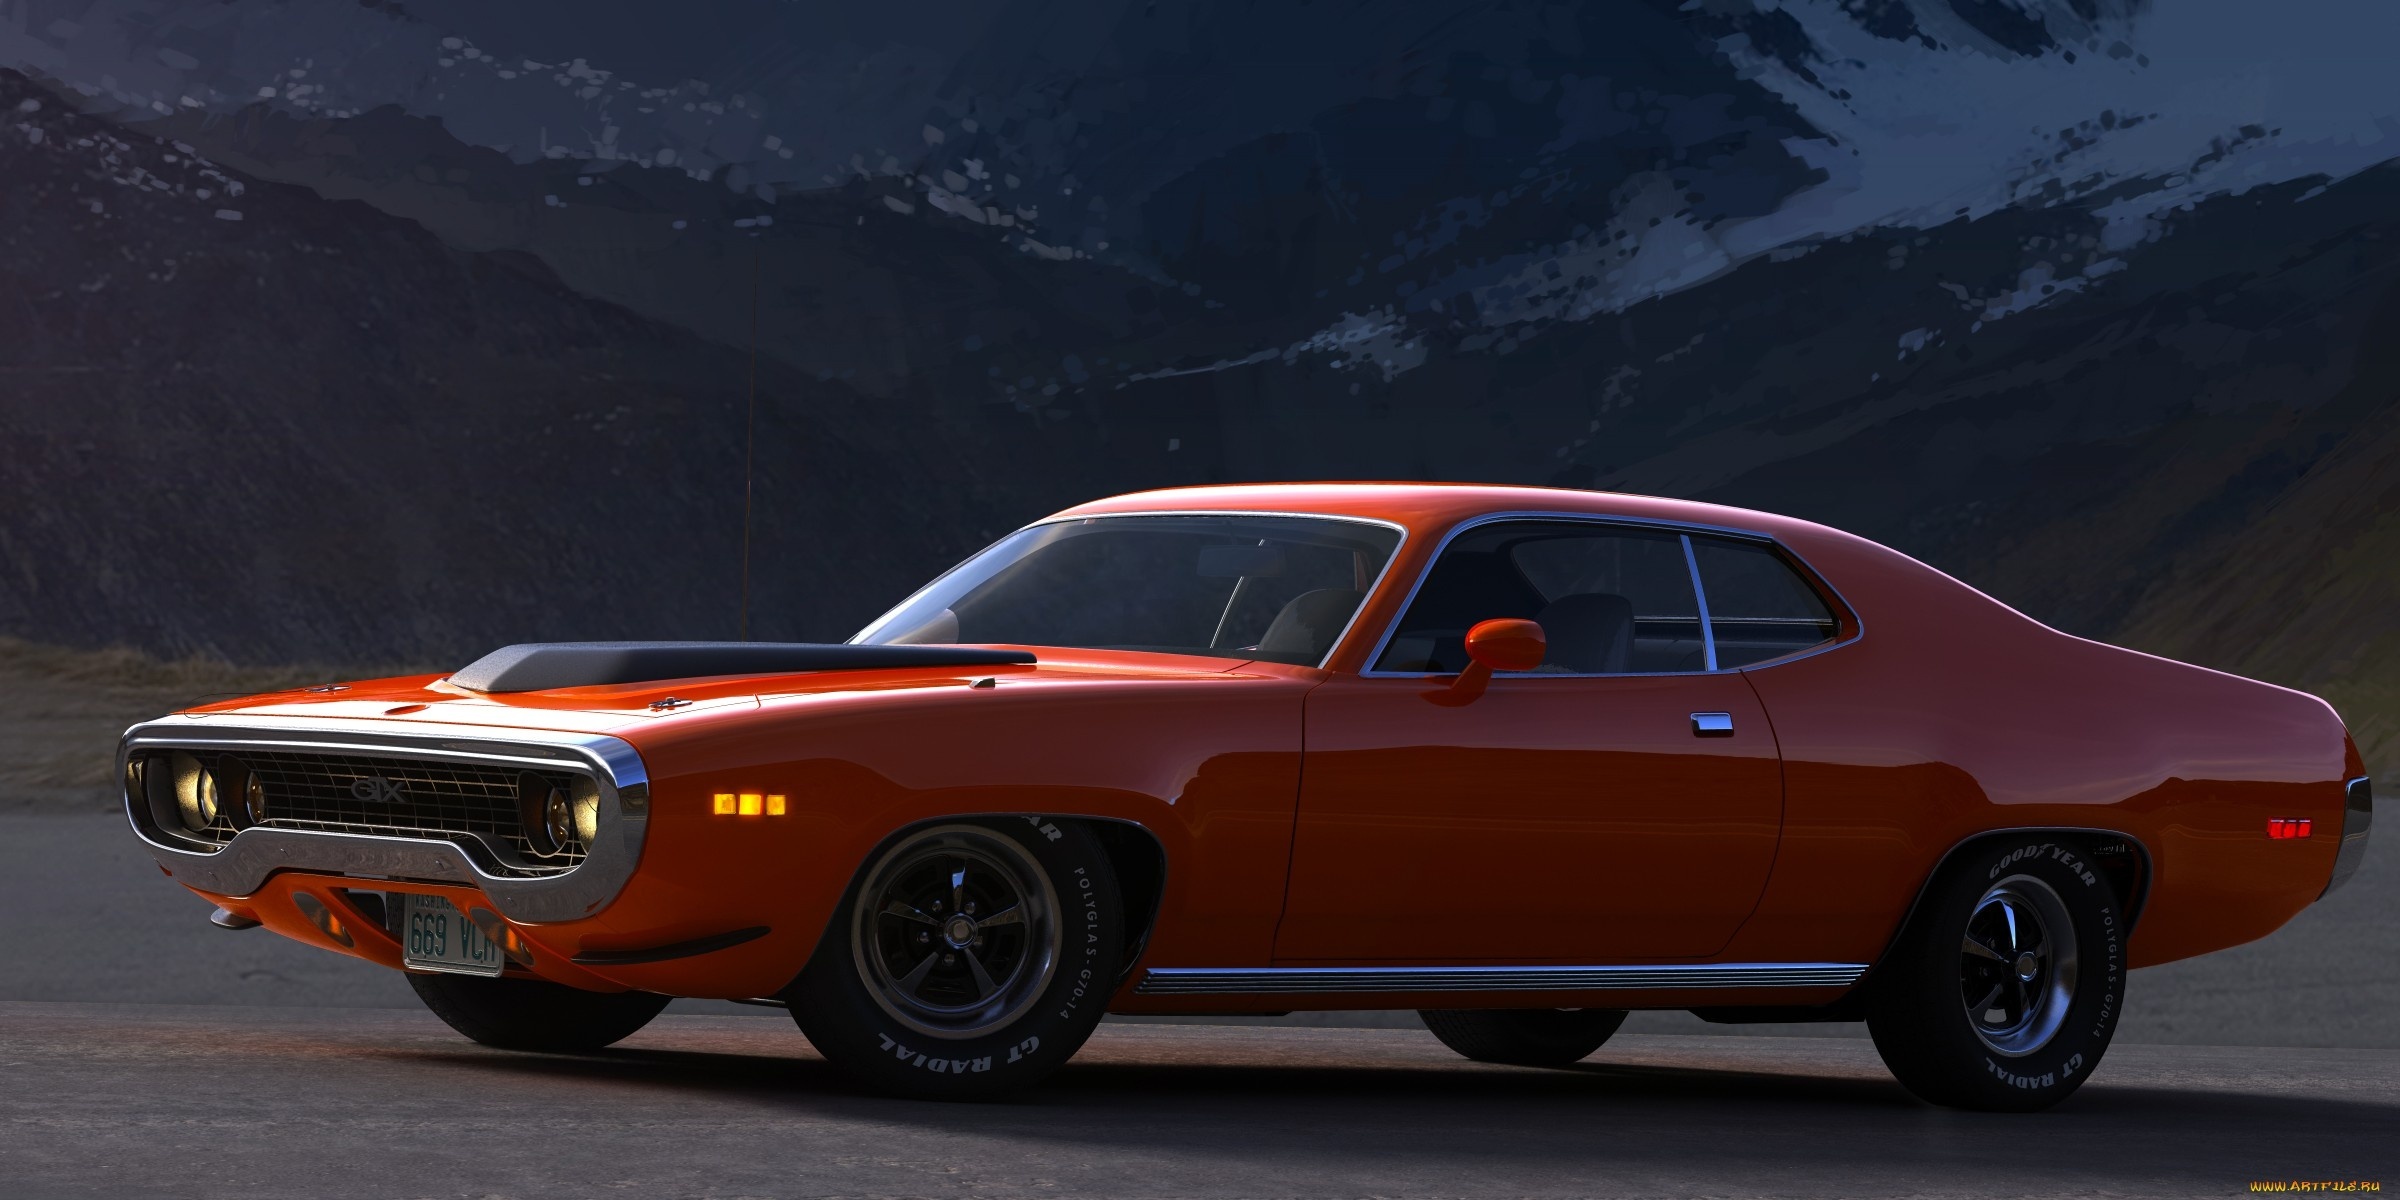 2 Plymouth Roadrunner HD Wallpapers | Backgrounds - Wallpaper Abyss